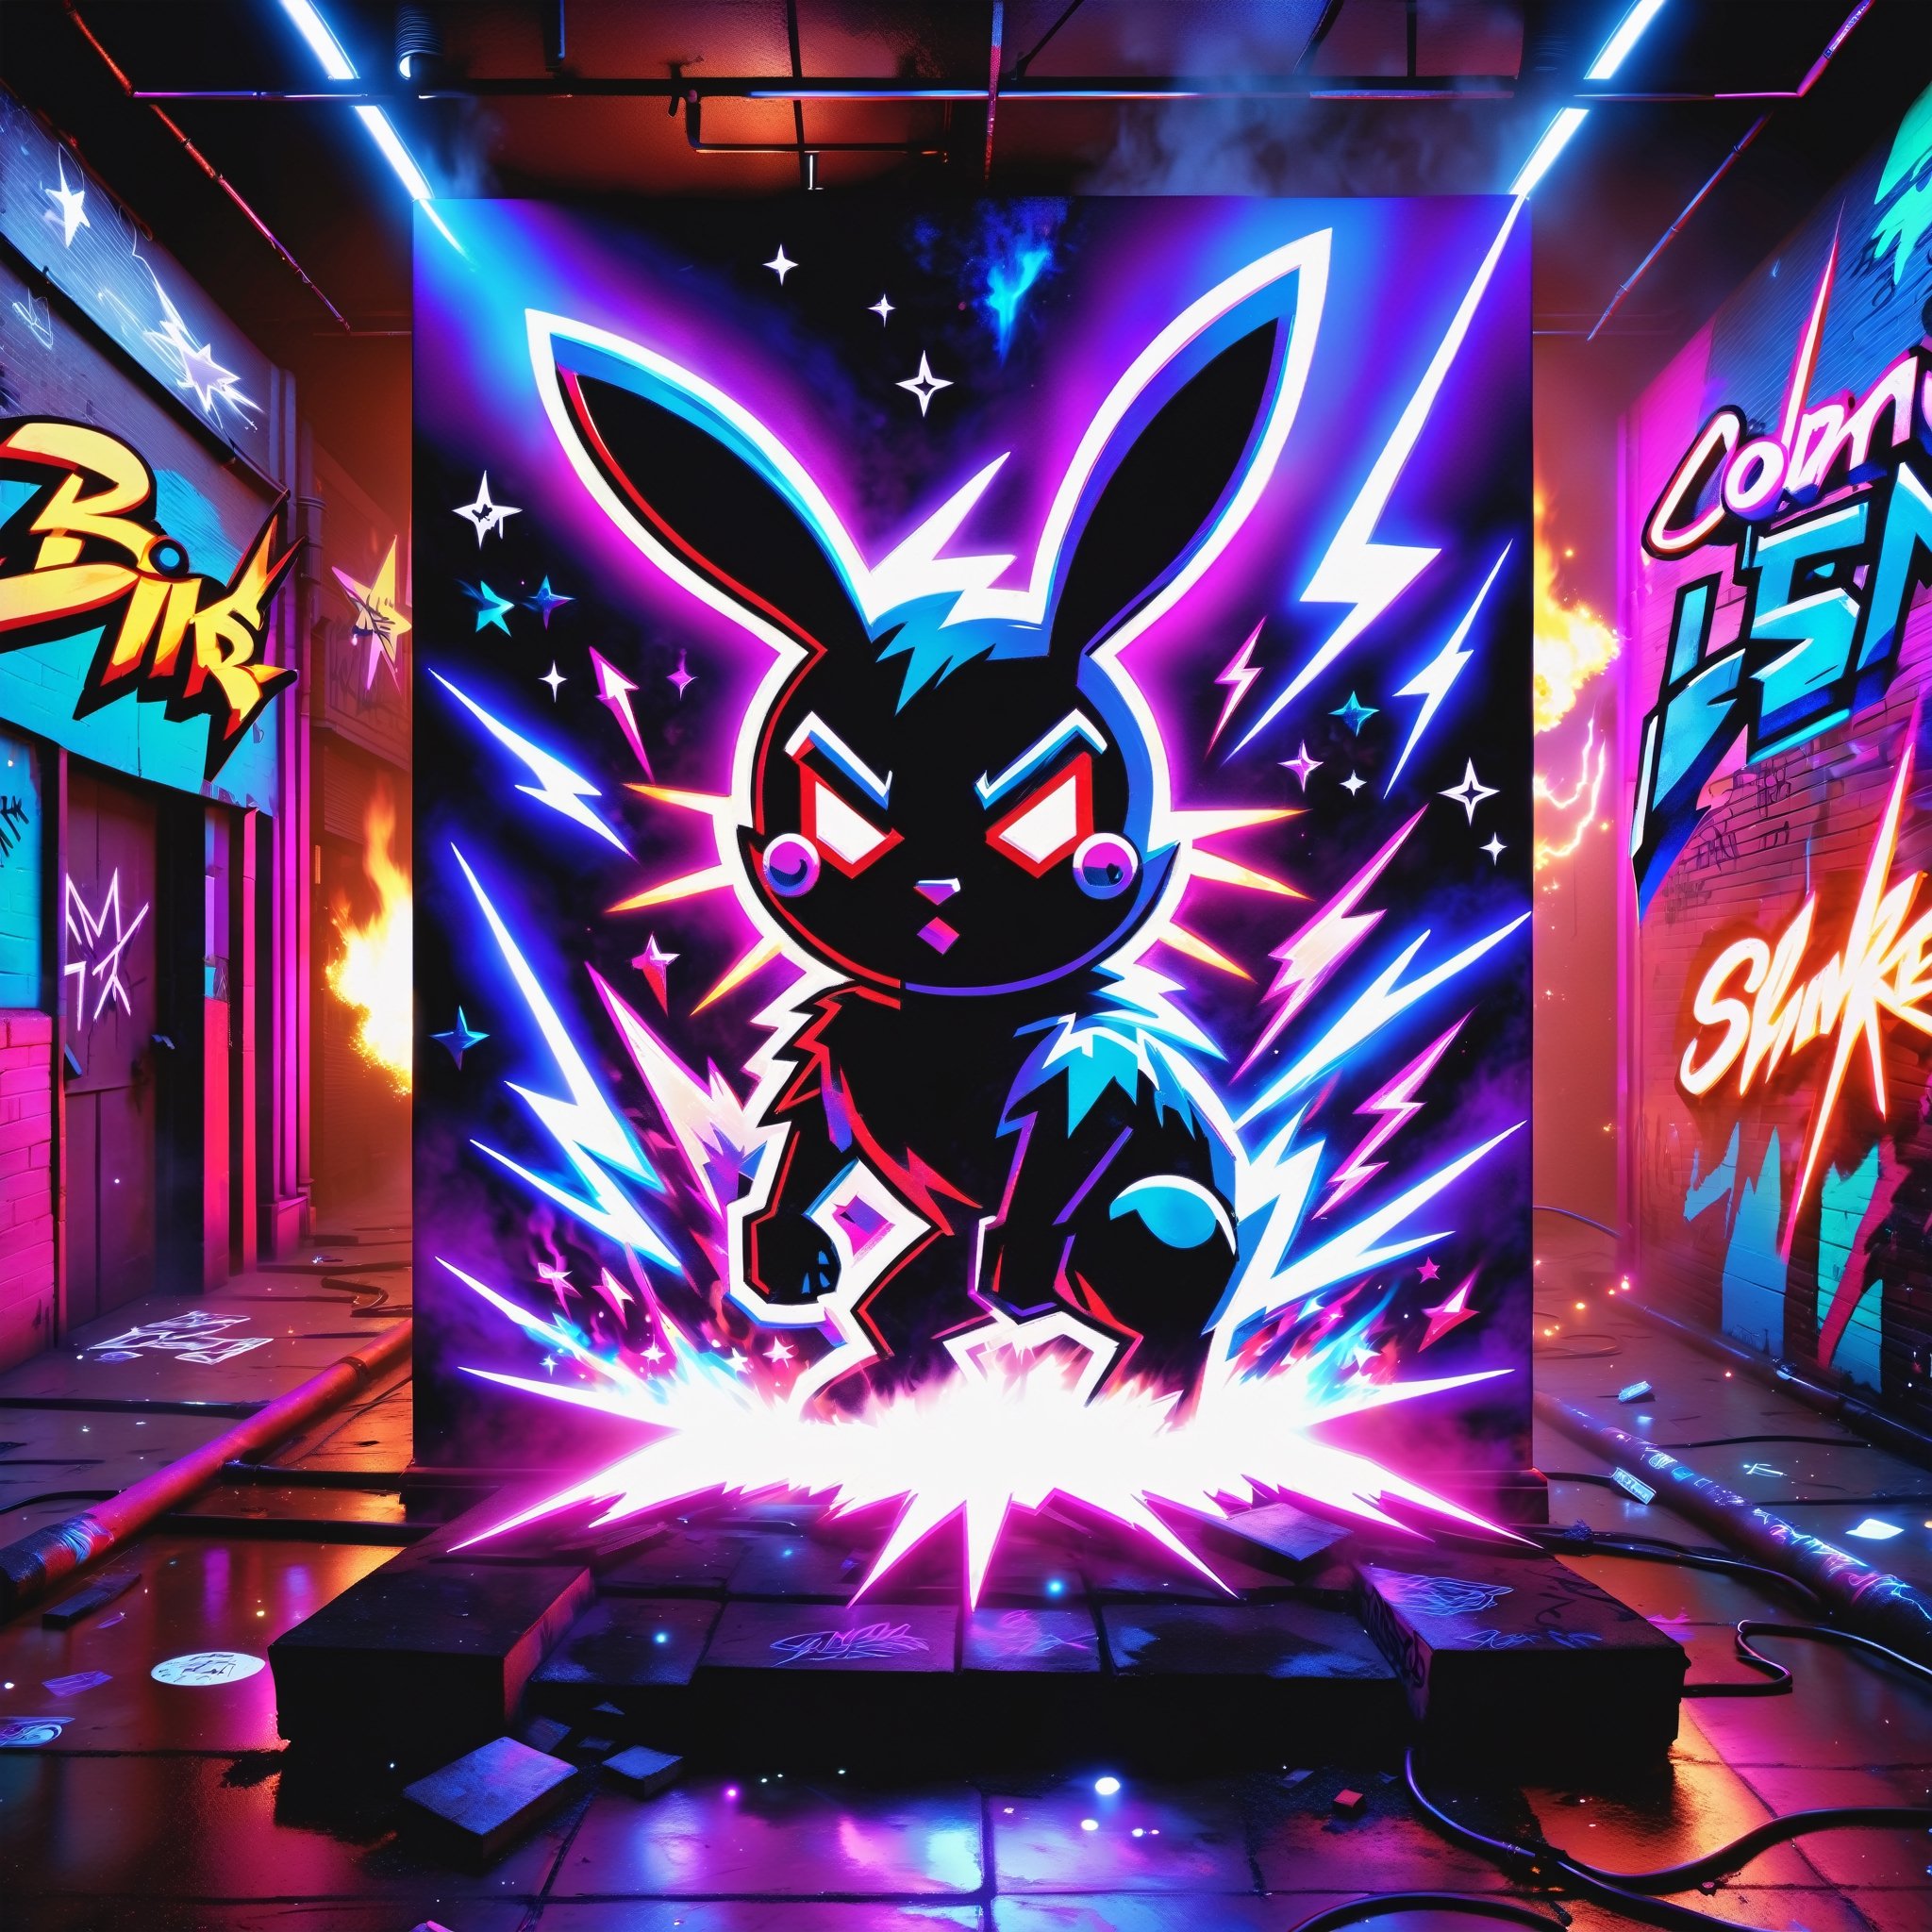 "Bad Bunny" in neon red, black, metallic, purple, blue, Pink, neon, sparkles, Neon colored smoke, planet, graffiti background,
,composed of elements of street art Fire thunder Lightning Electricity Space stars and neon lights atomic explosions, Cyberpunk,DonMH010D15pl4yXL 